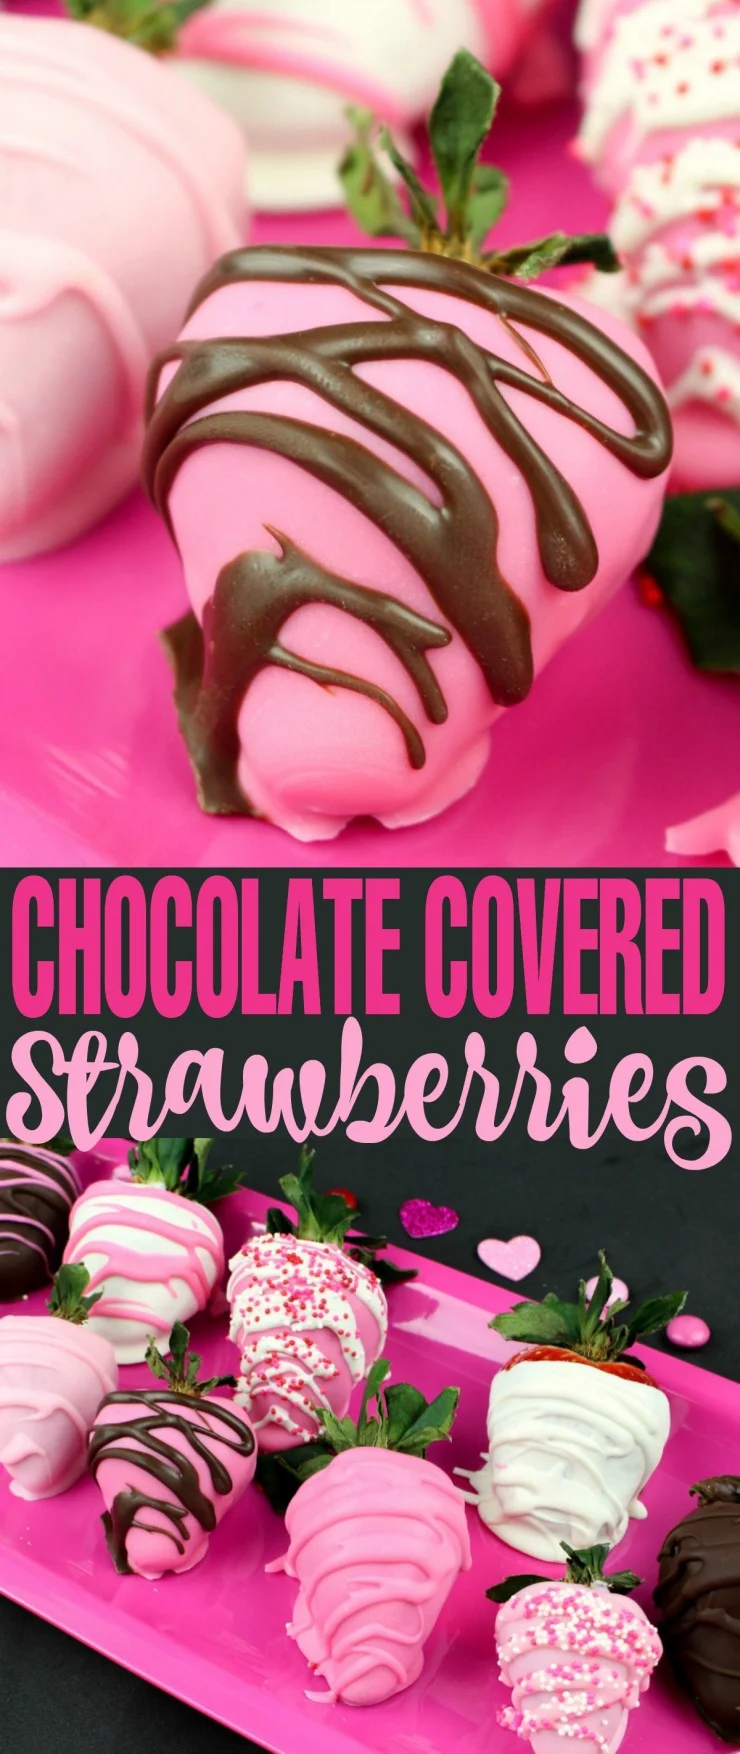  Chocolate Covered Strawberries are a Valentine's Day classic. This Valentine's Day Chocolate Covered Strawberries recipe is an easy way to make this romantic and pretty treat at home.